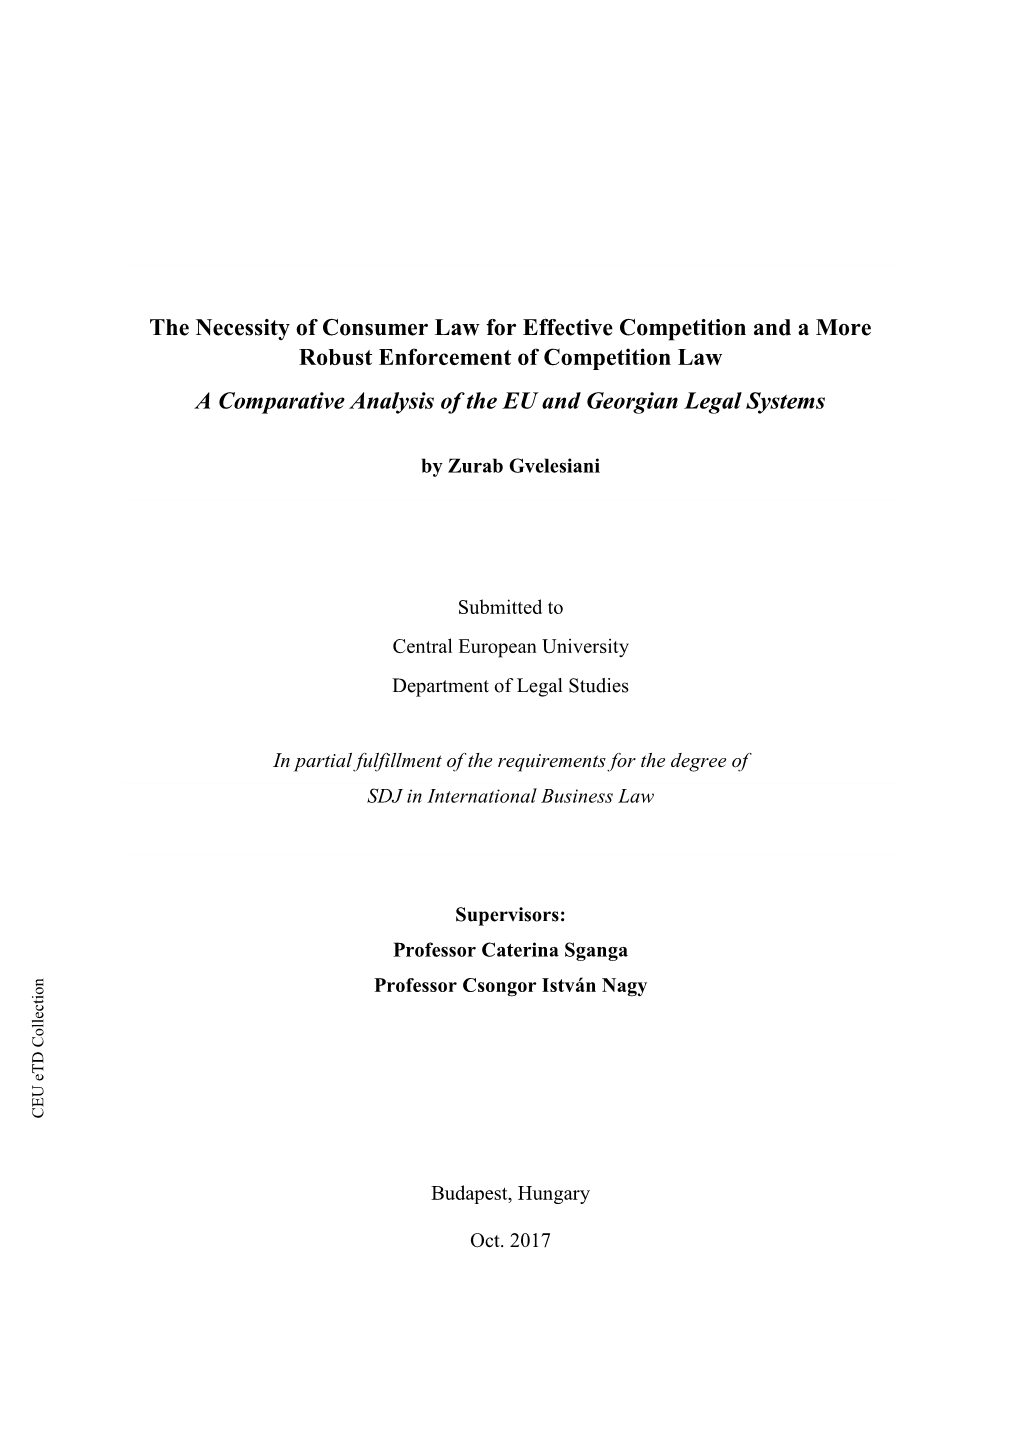 The Necessity of Consumer Law for Effective Competition and a More Robust Enforcement of Competition Law a Comparative Analysis of the EU and Georgian Legal Systems